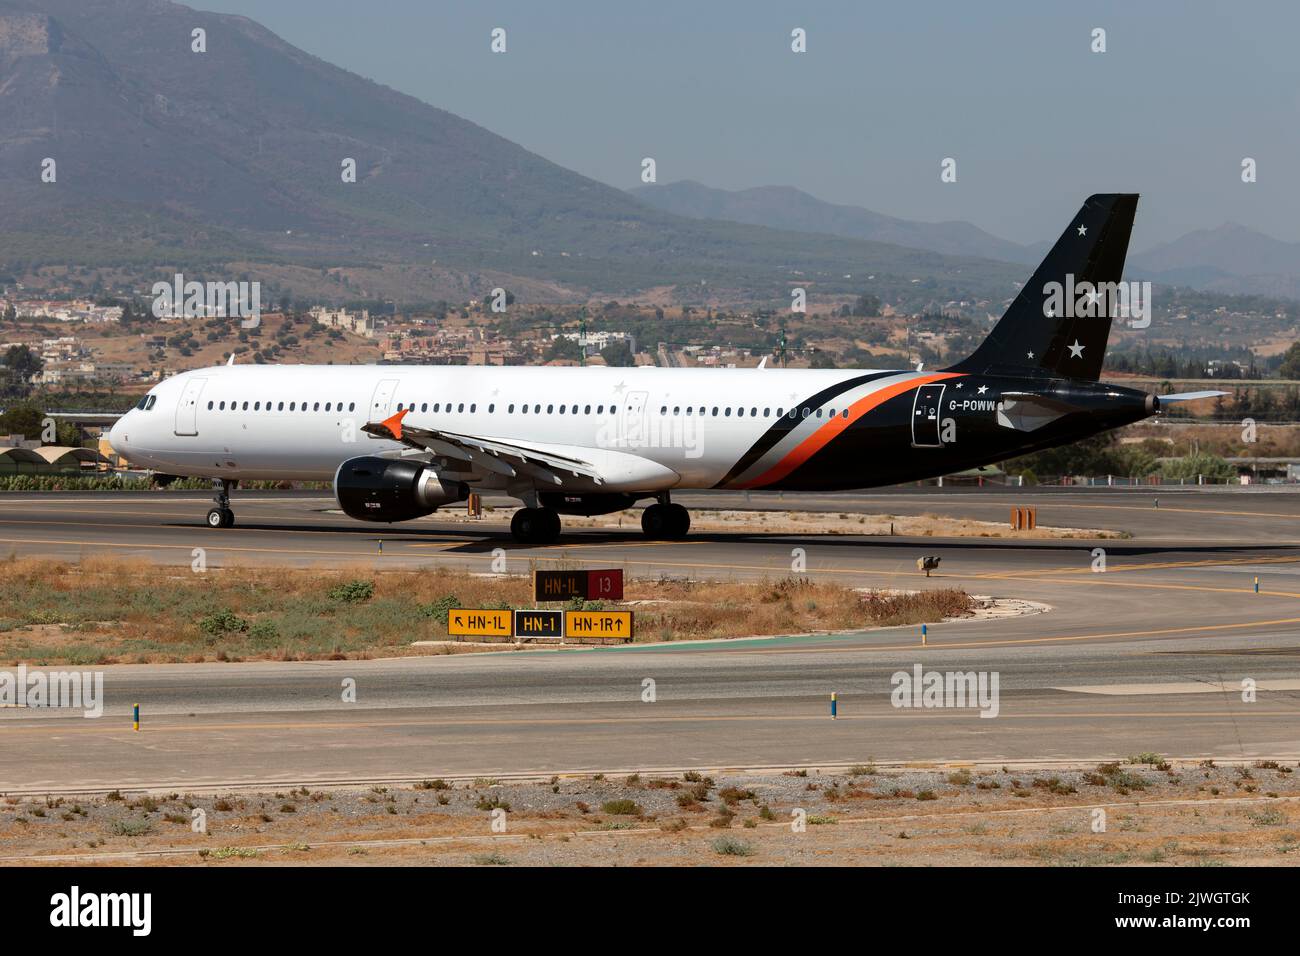 A Titan Airways Airbus 321 ready to leave Malaga Costa del sol airport.Titan Airways is a British charter airline based at London Stansted Airport. The carrier specialises in short-notice ACMI and wet lease operations as well as ad-hoc passenger and cargo charter services to tour operators, corporations, governments and the sports and entertainment sectors. Stock Photo